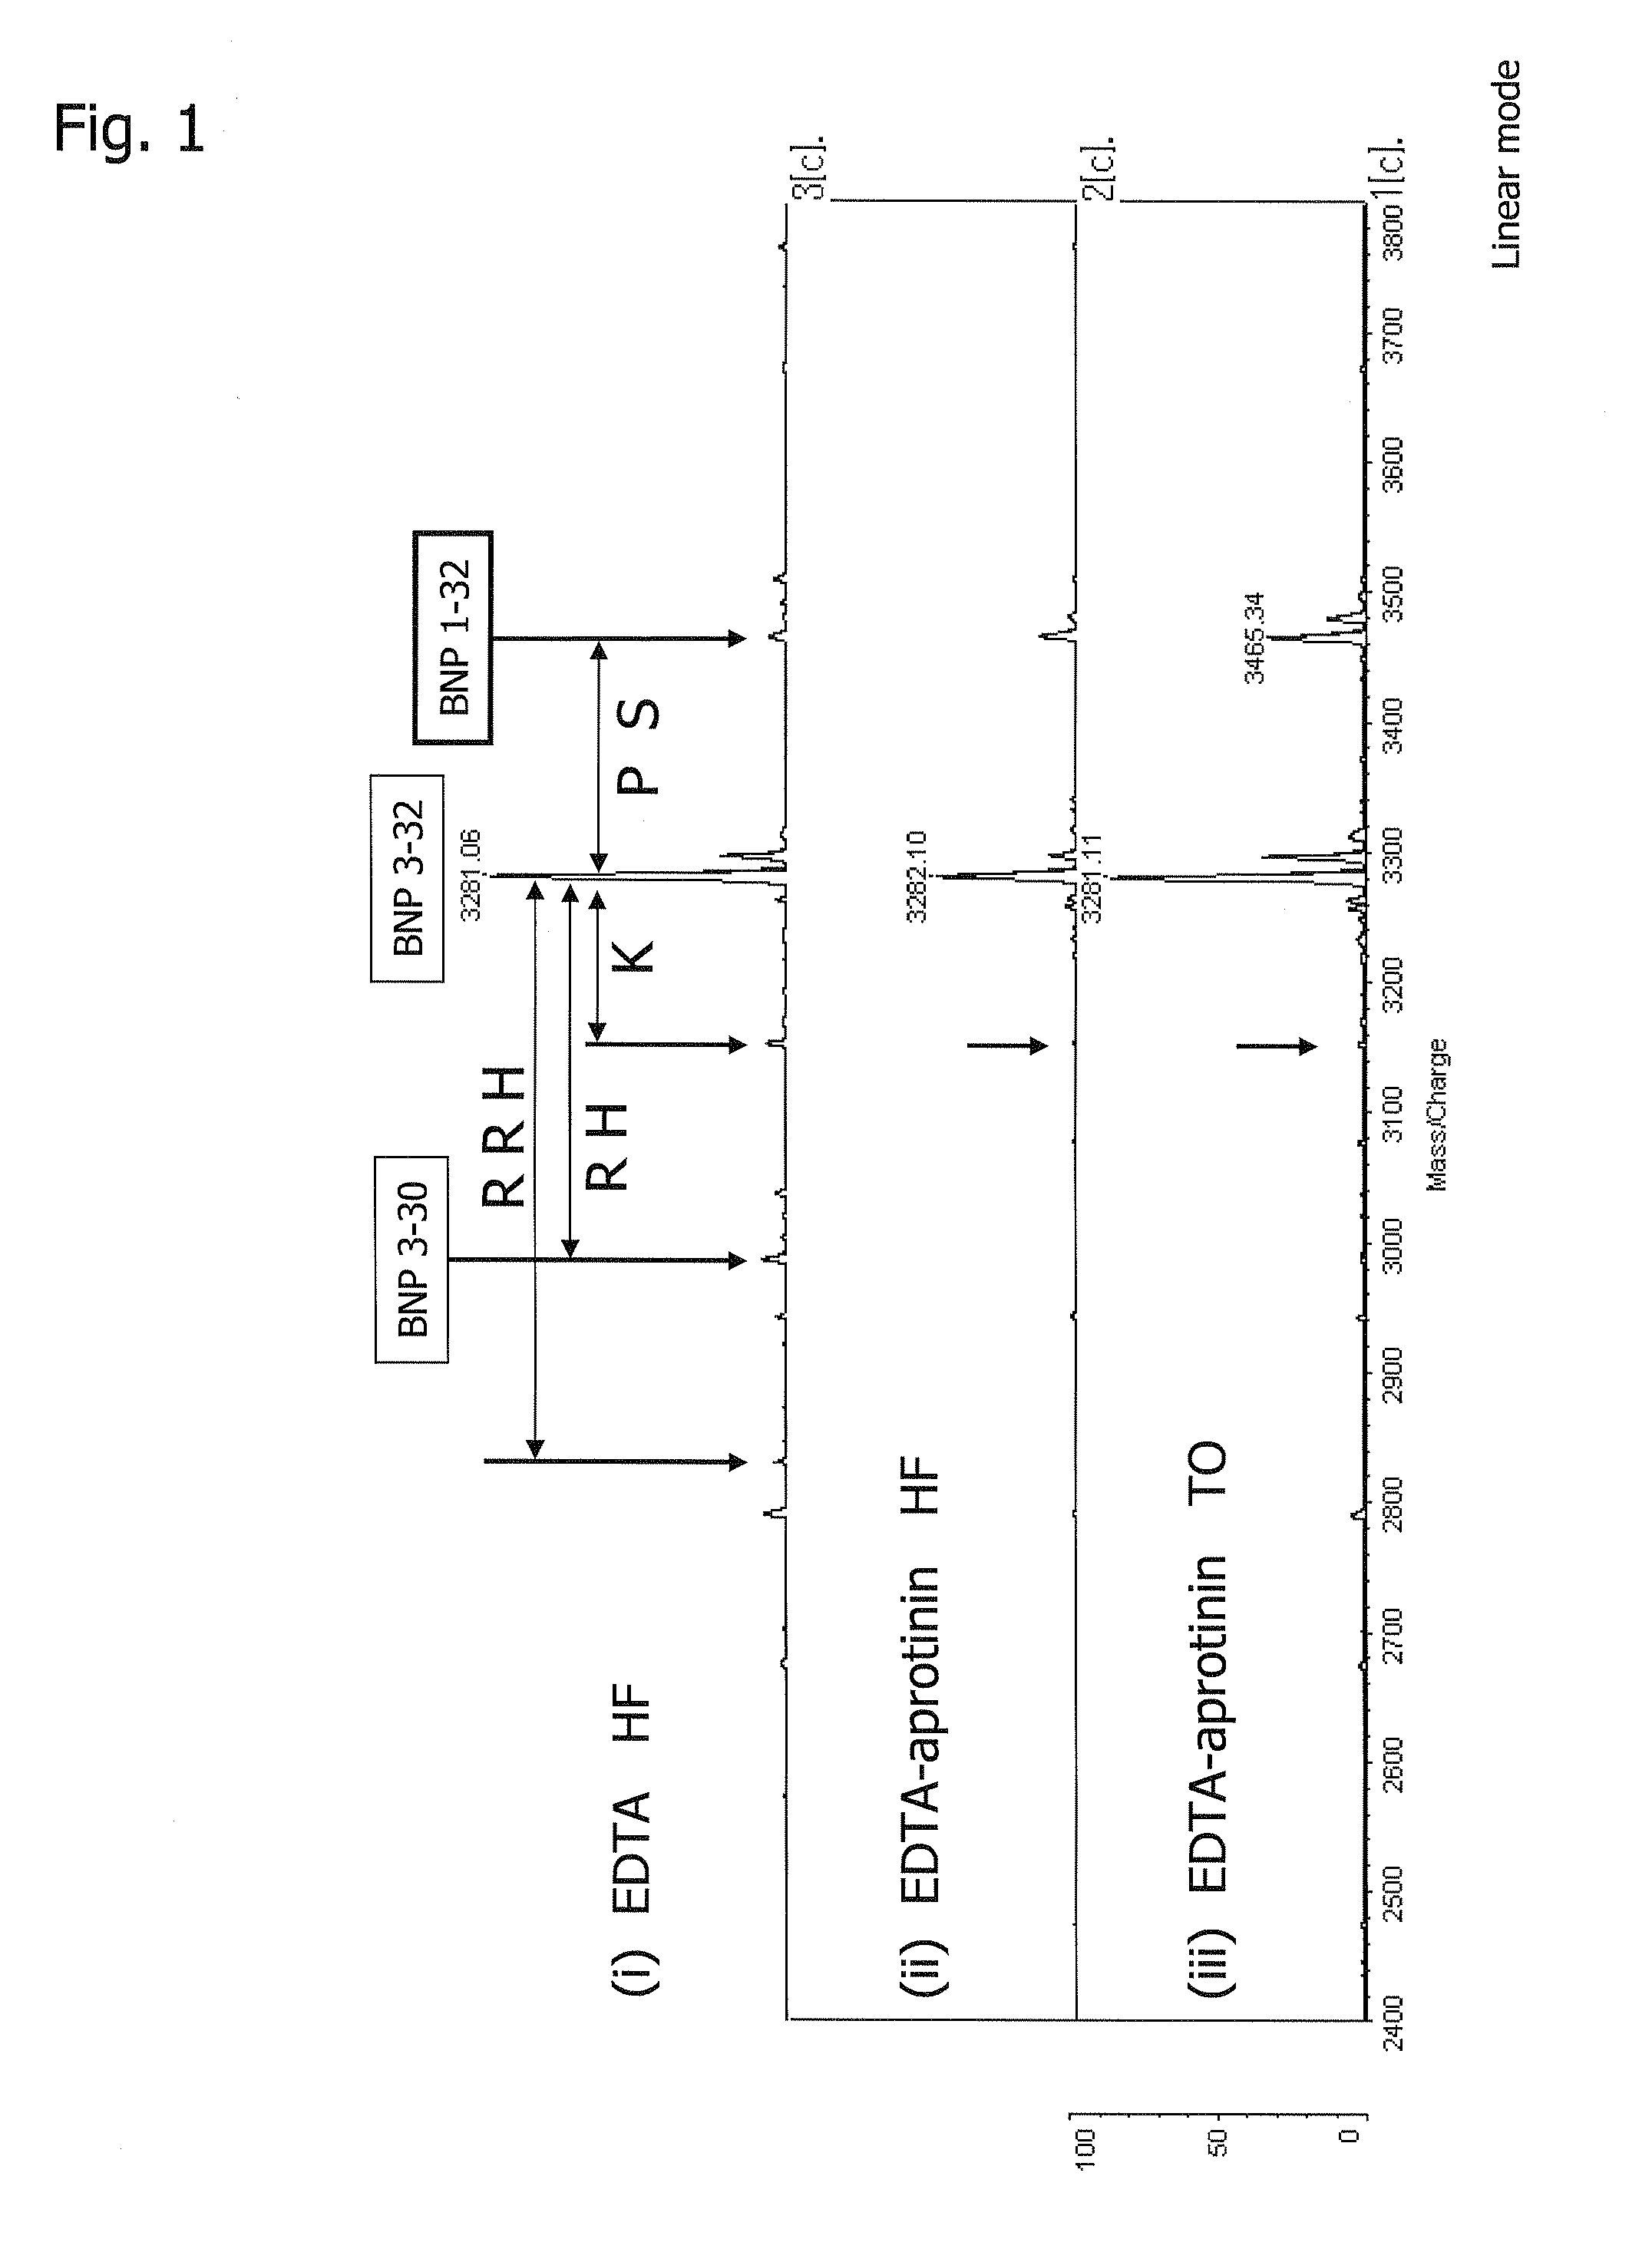 Method for evaluating myocardial ischemic state using blood sample